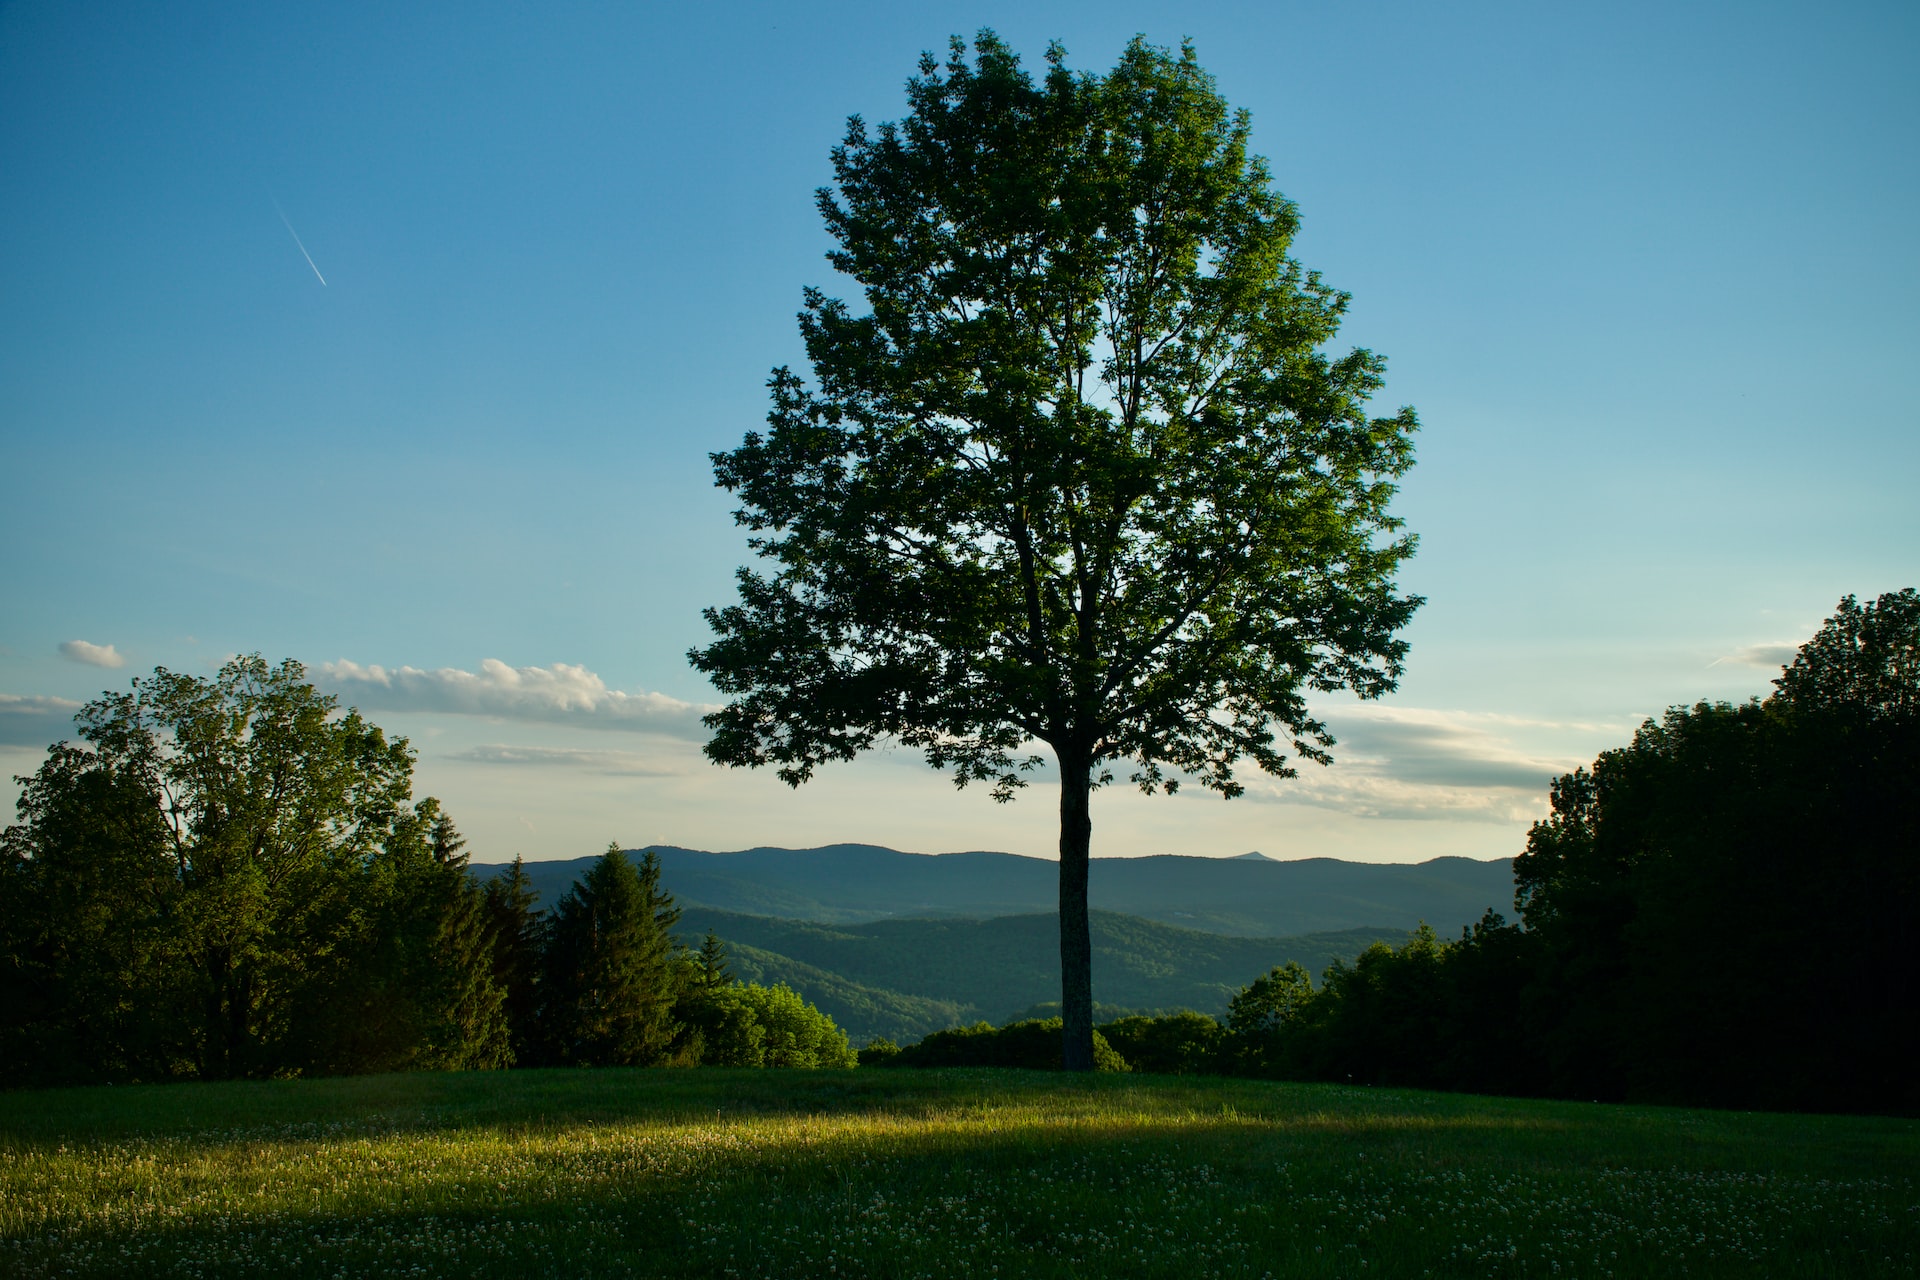 A solitary green tree with high branches with Vermont's Green Mountains in the background.